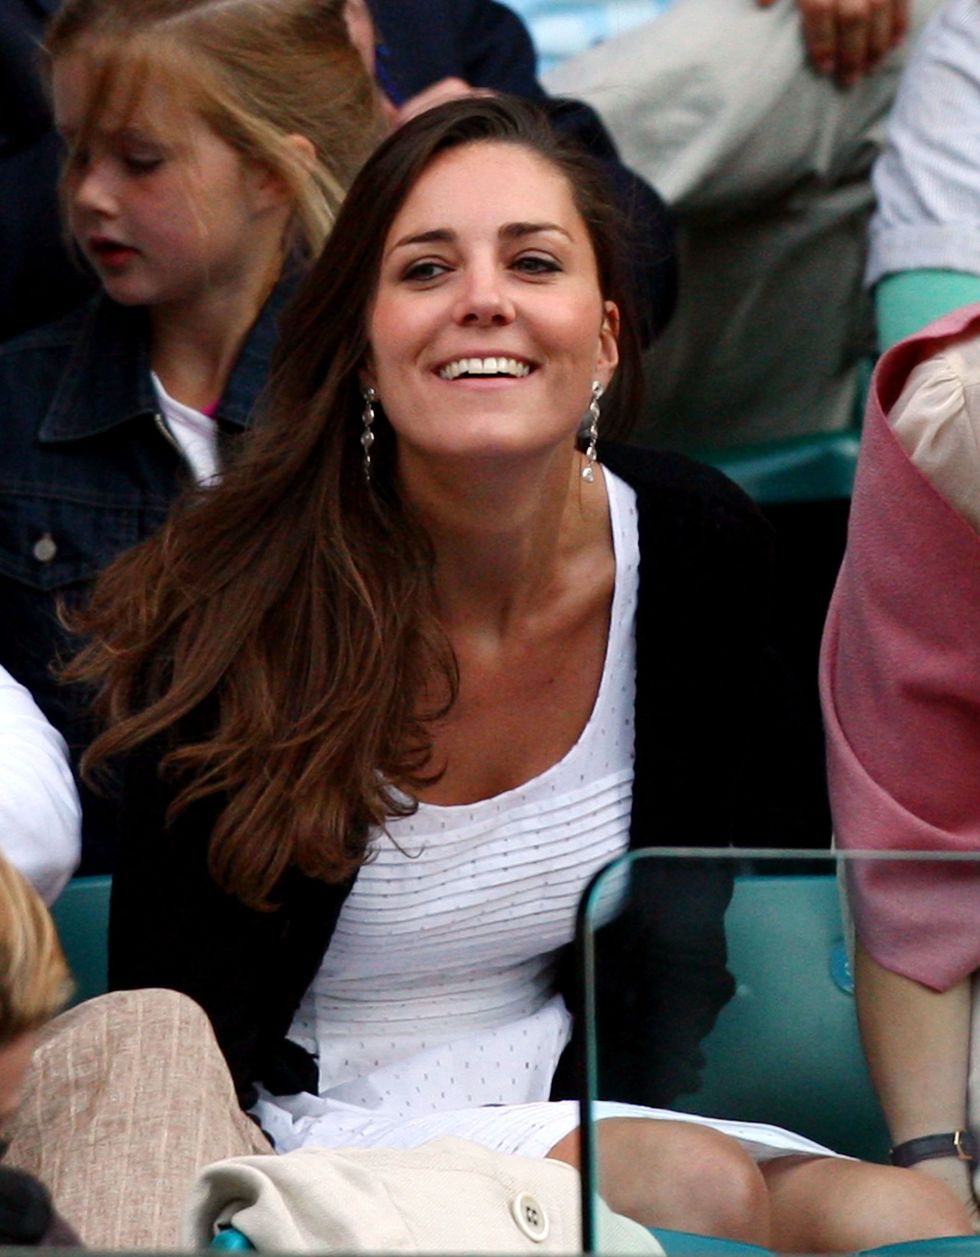 LONDON - JUNE 28:  Prince William's girlfriend Kate Middleton attends day six of the Wimbledon Lawn Tennis Championships at the All England Lawn Tennis and Croquet Club on June 28, 2008 in London, England.  (Photo by Ryan Pierse/Getty Images)